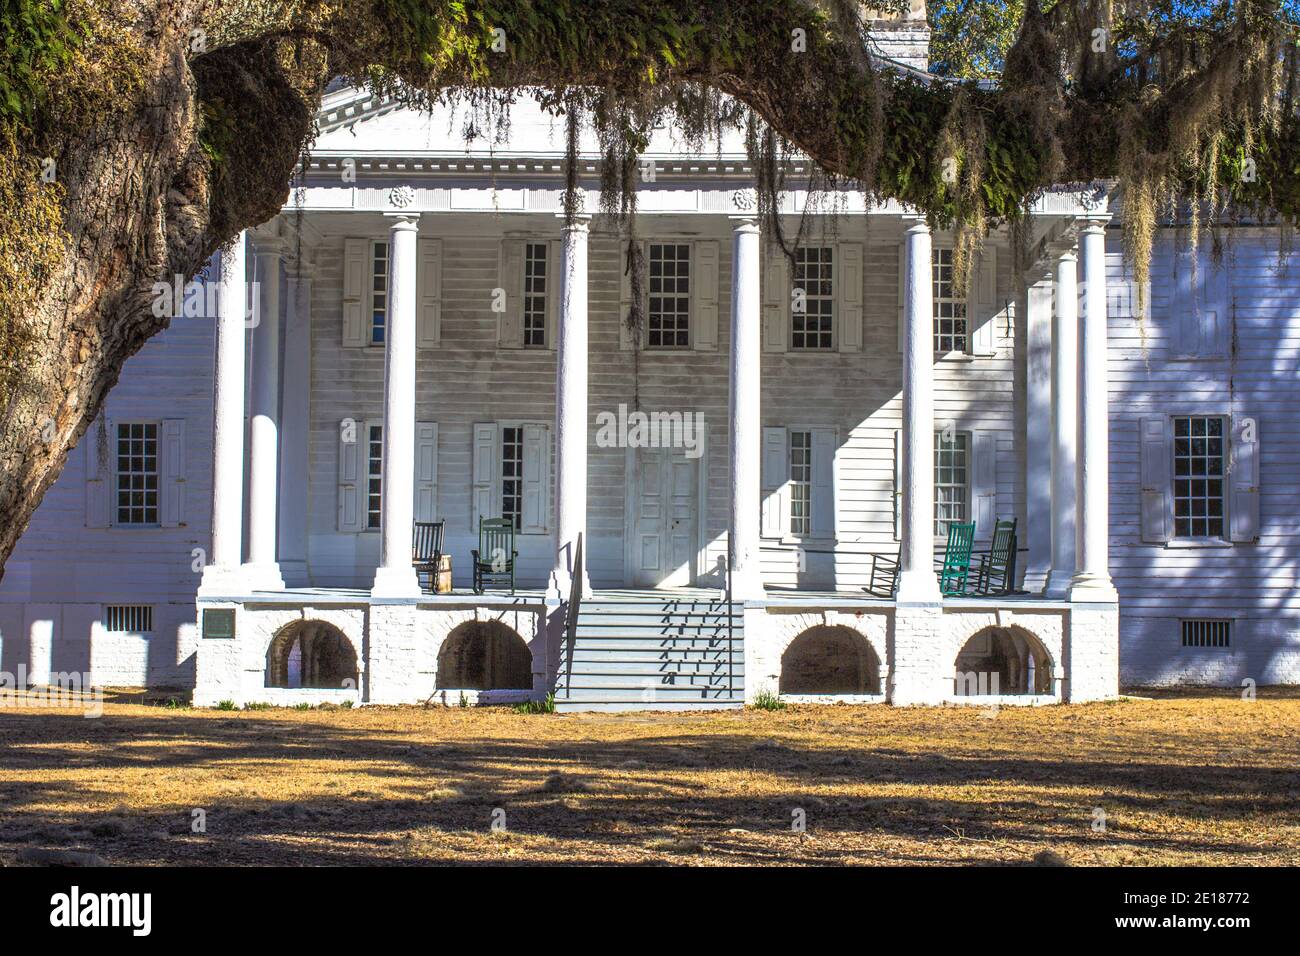 Historic and purportedly haunted Hampton Plantation State Historic Site is open for tours and gives visitors a glimpse into plantation life. Stock Photo